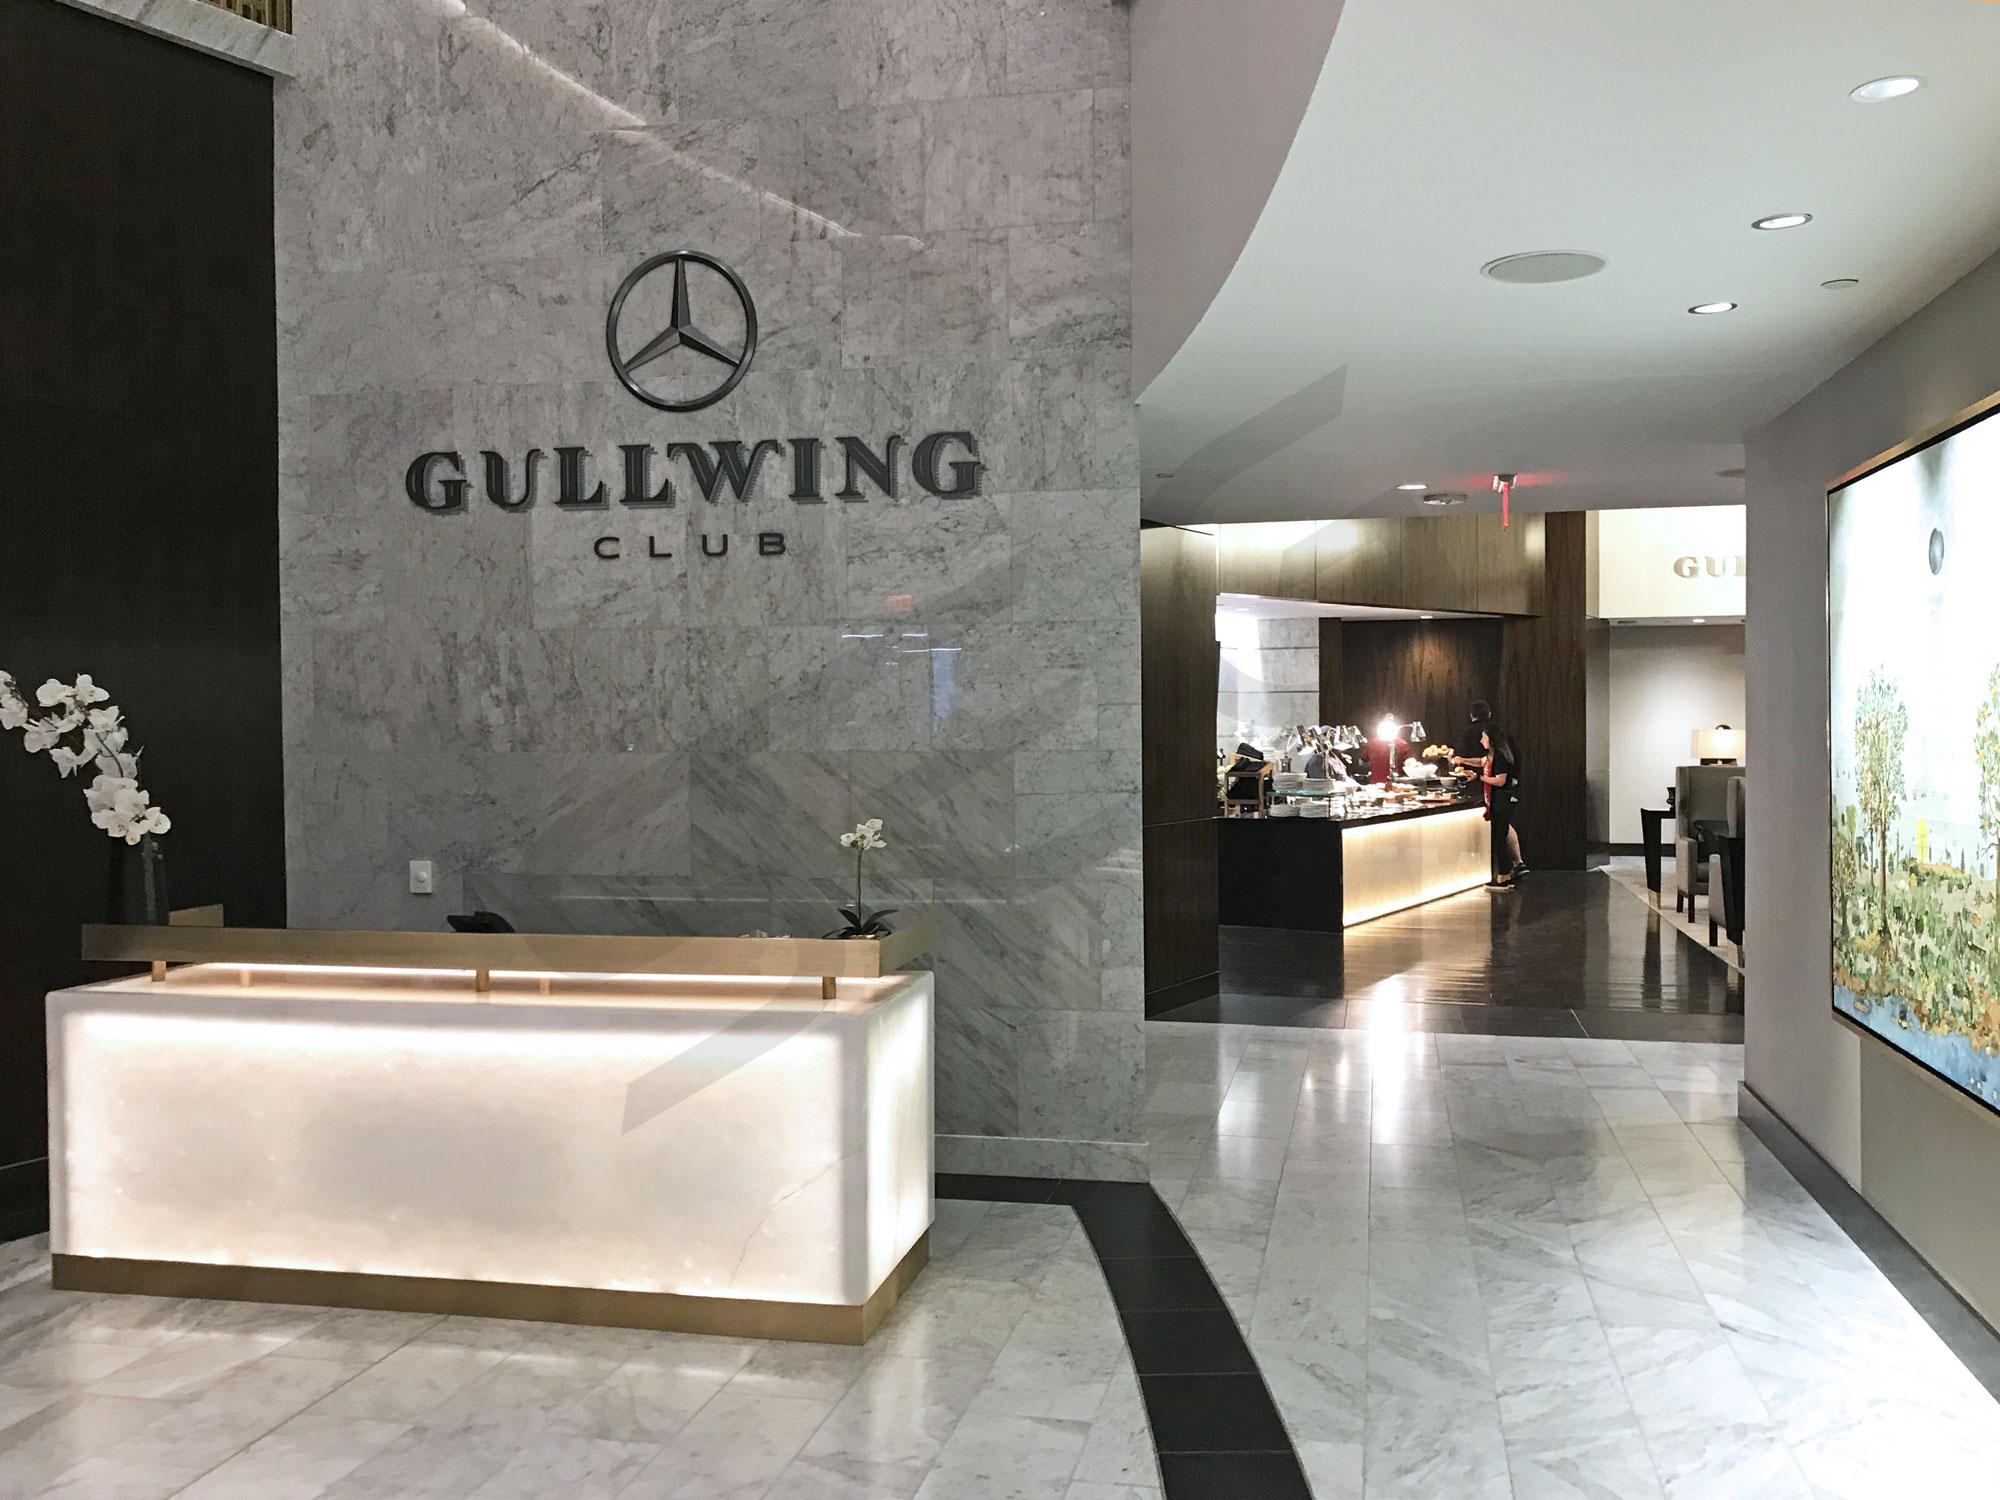 Gullwing Club Suite ticketholders have access to an incredible VIP stadium club just outside their suite